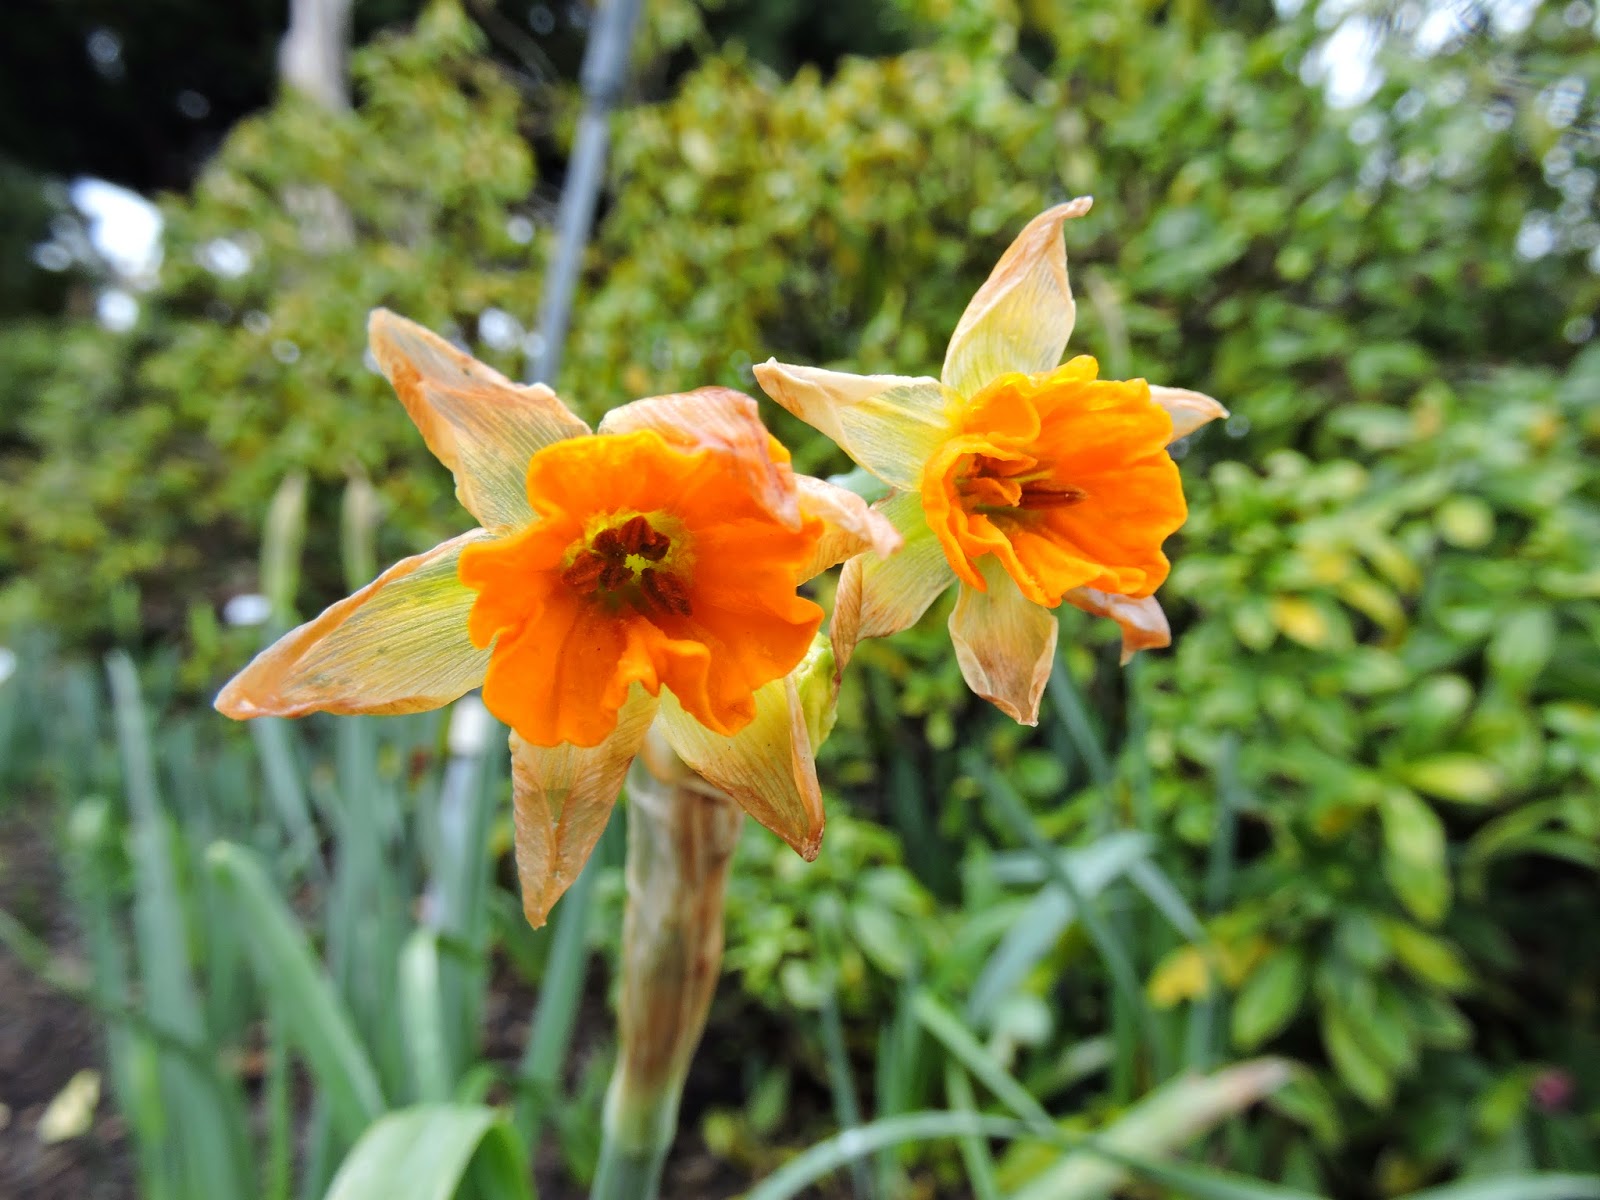 The Amateur Anthecologist: The Narcissus Cometh!